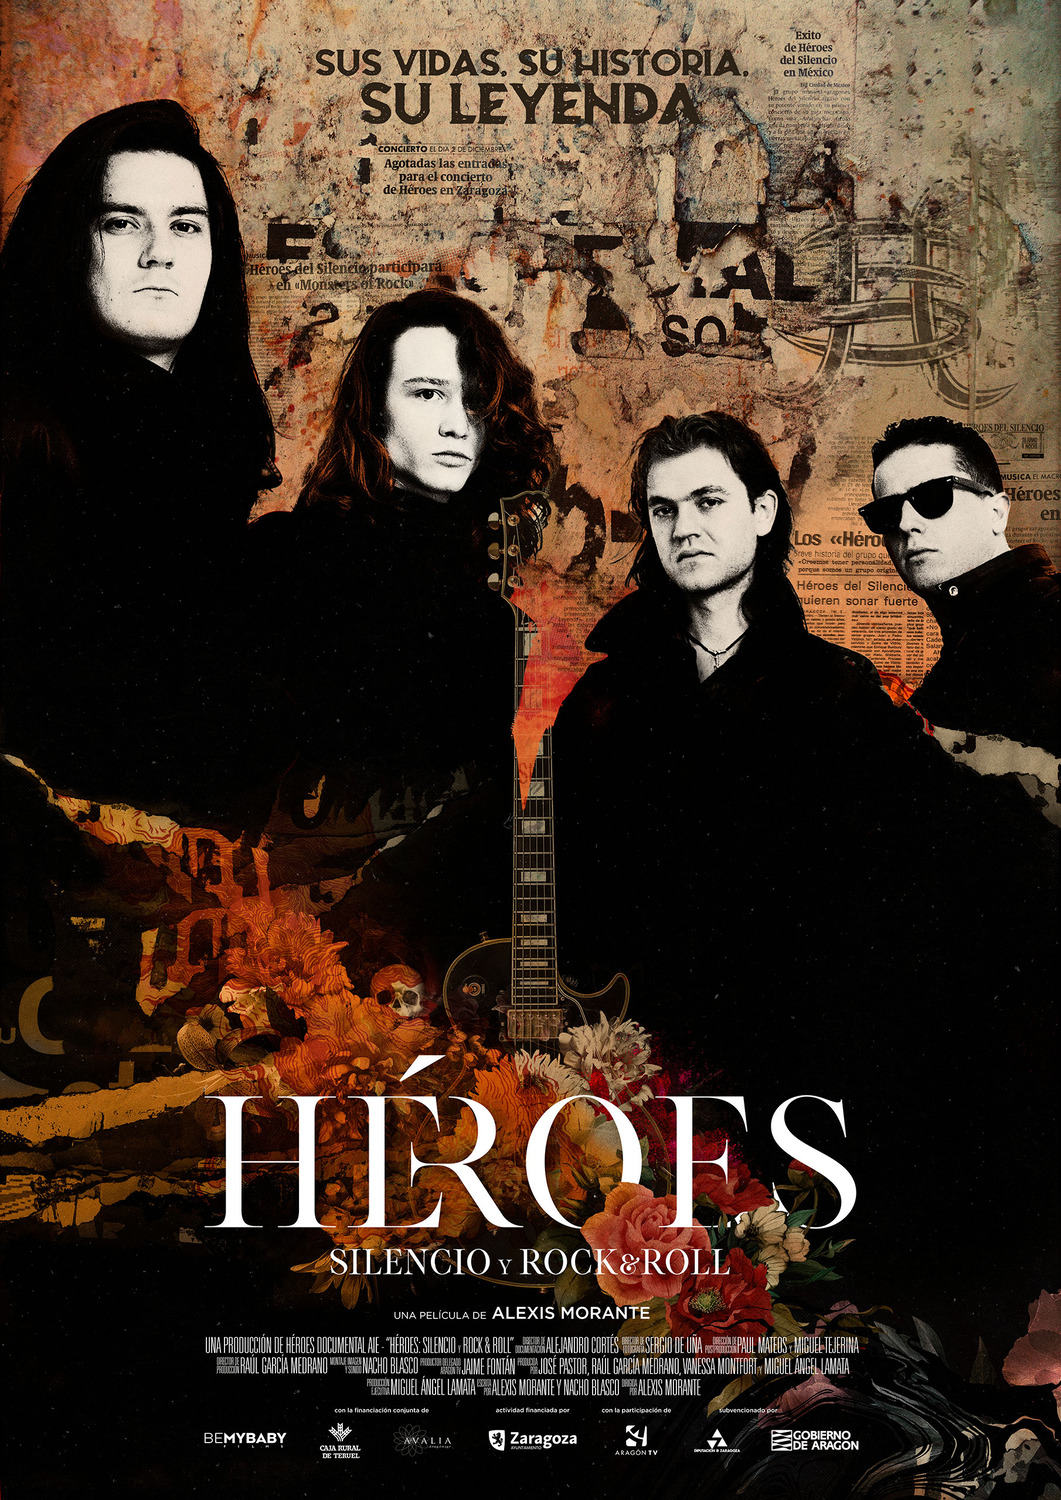 Extra Large Movie Poster Image for Héroes. Silencio y Rock & Roll 